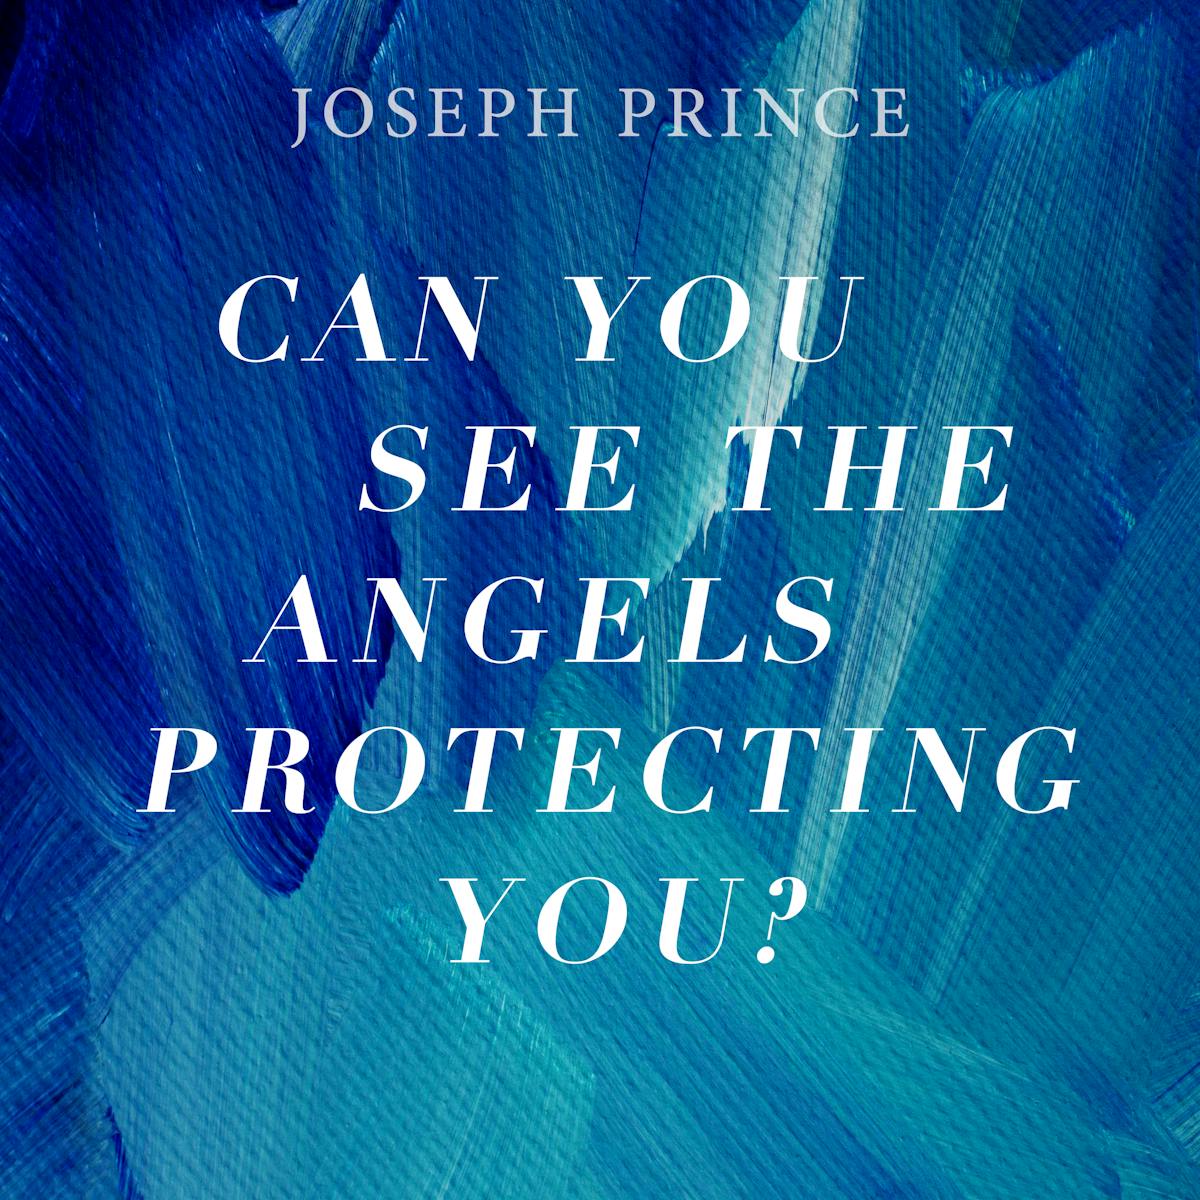 Can You See The Angels Protecting You Official Joseph Prince